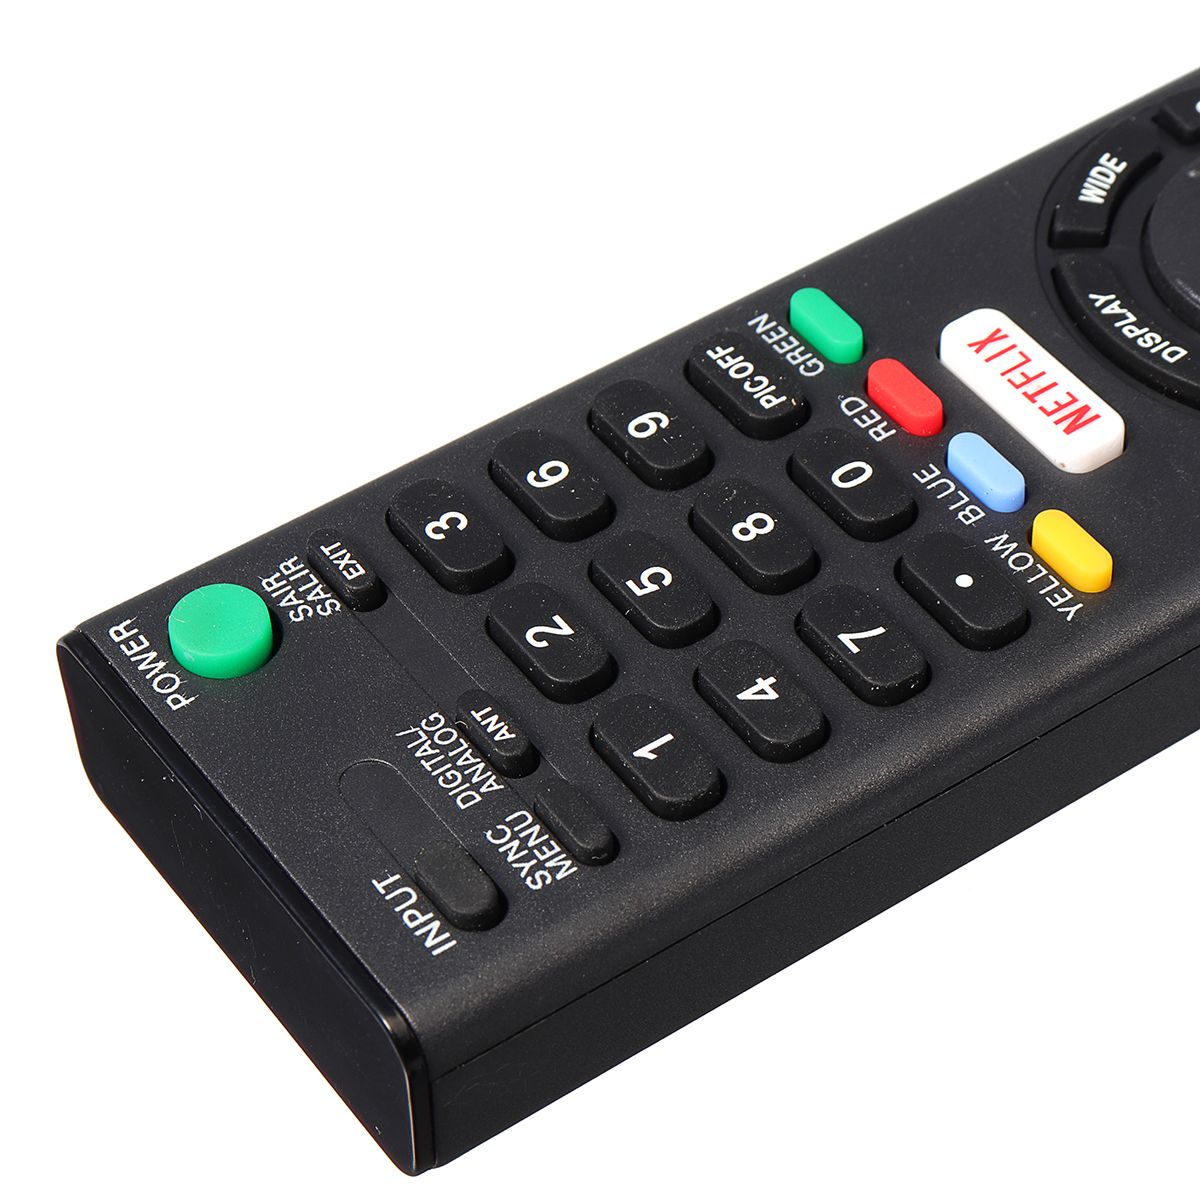 RMT-TX102U-Remote-Control-Replacement-For-SONY-KDL-48W650D-32W600D-40W600D-TV-1413697